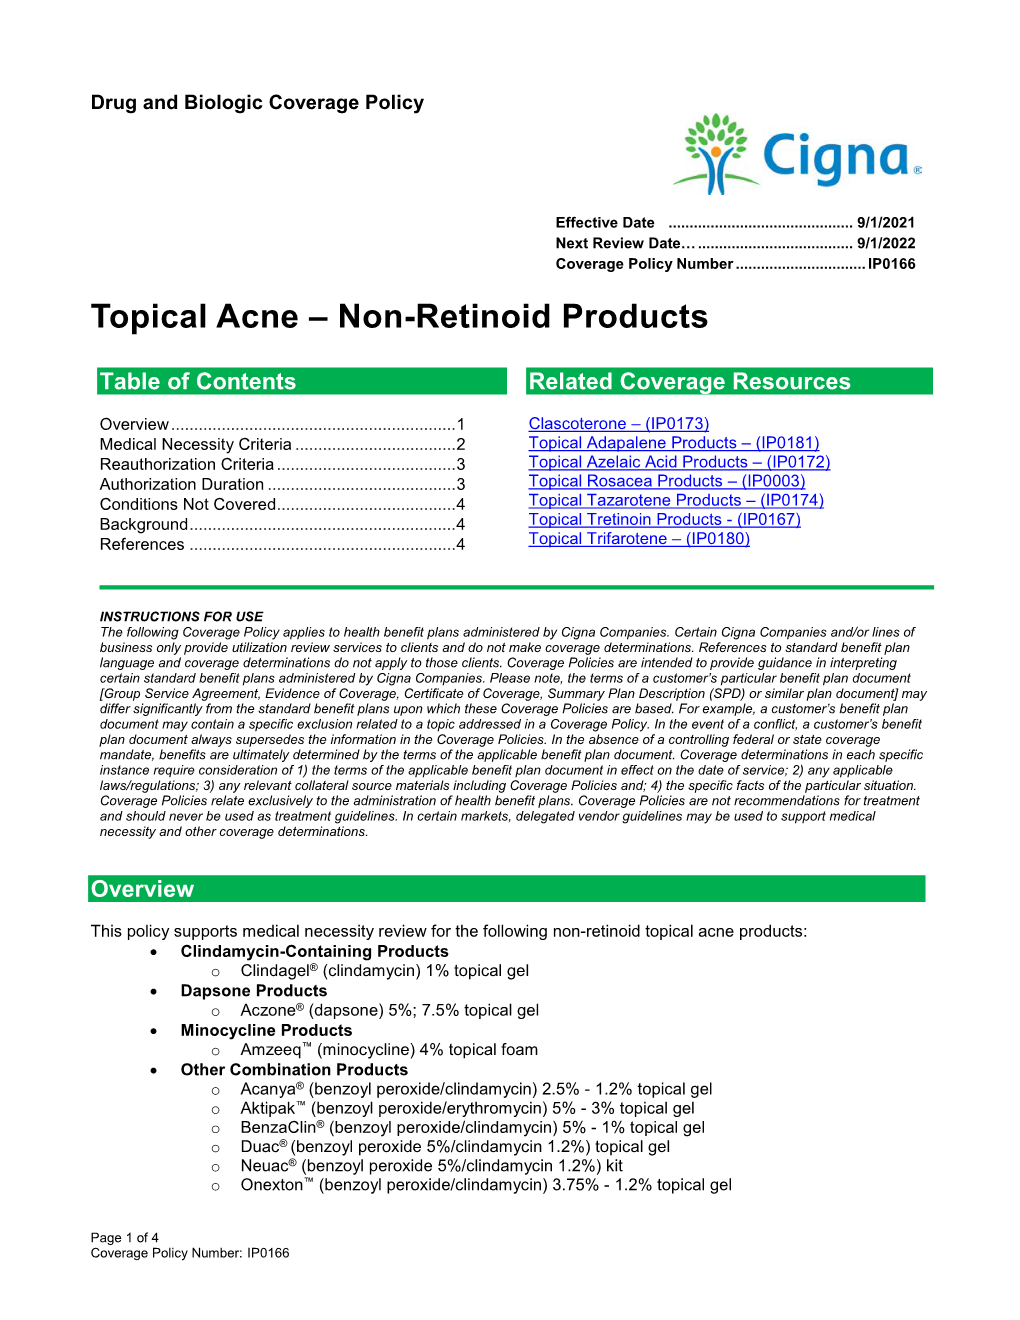 Topical Acne – Non-Retinoid Products